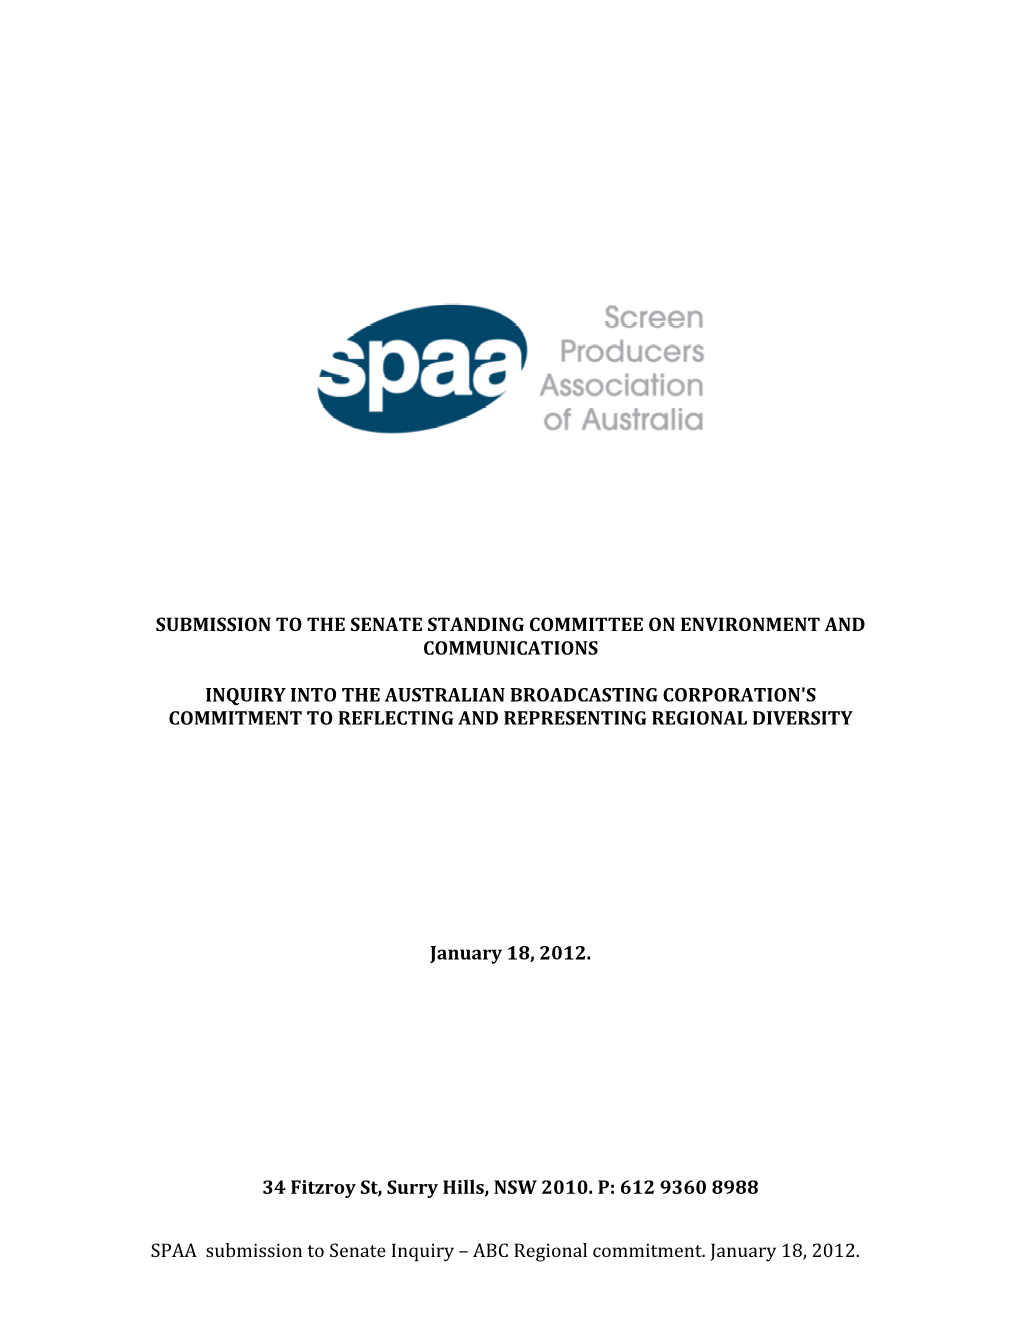 SPAA Submission to Senate Inquiry – ABC Regional Commitment. January 18, 2012